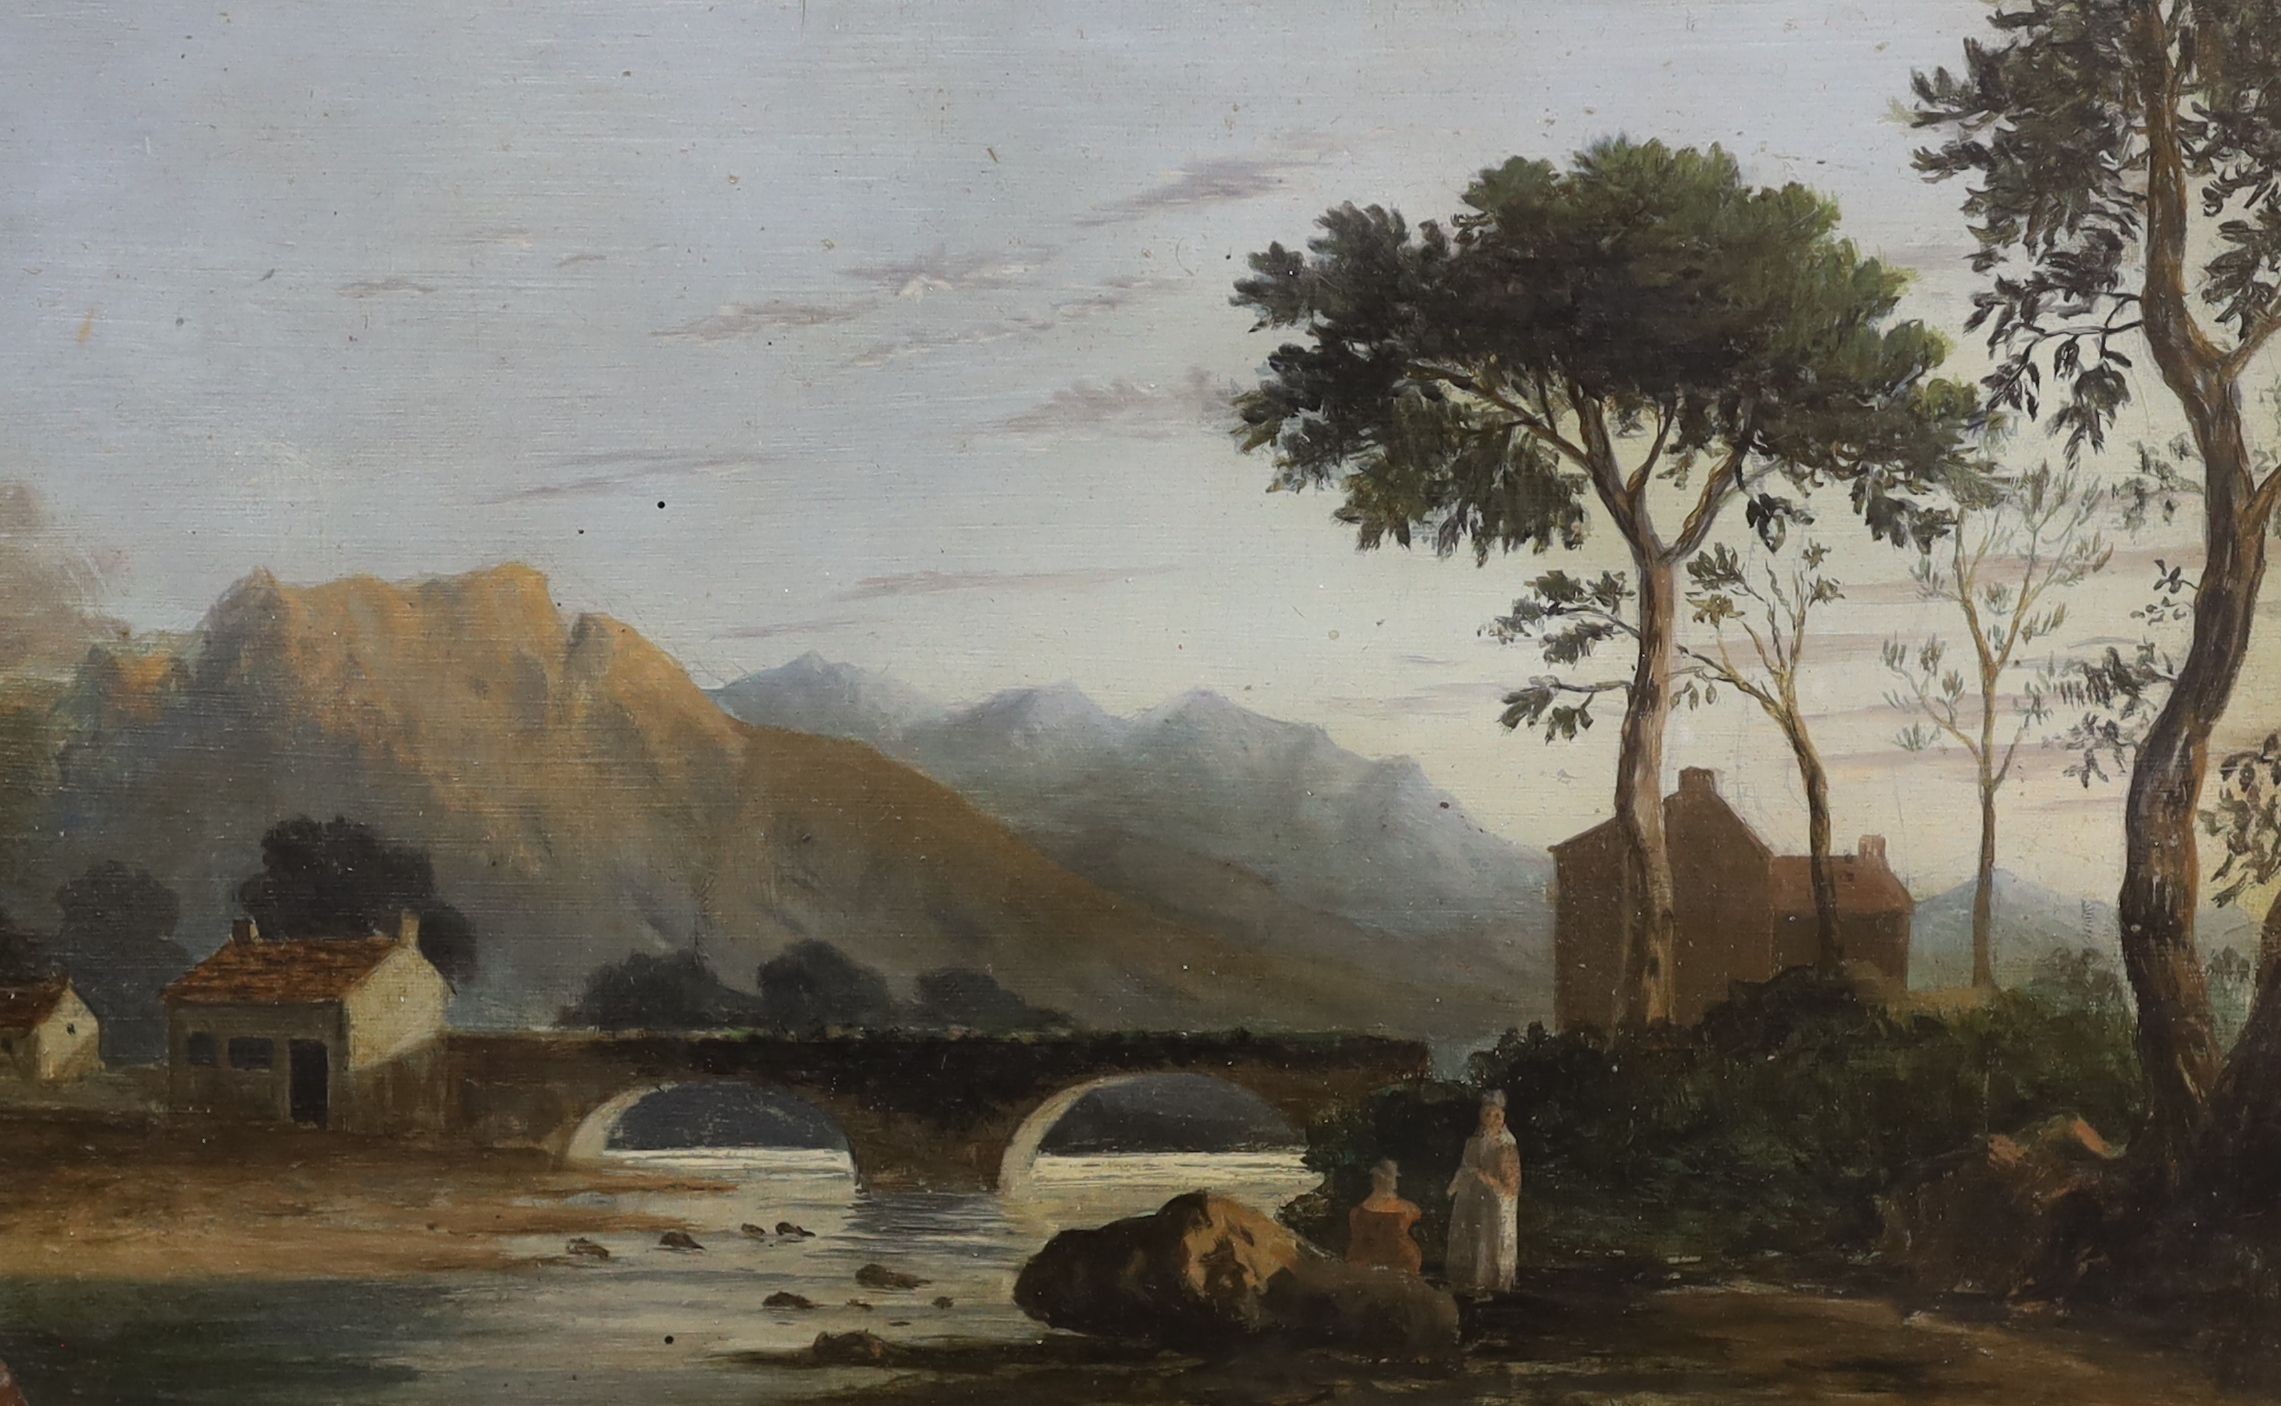 19th century English School, oil on panel, River landscape with figures near a stone bridge, 22 x 35c, an unframed oil still life of flowers and unframed oil on panel of a flower girl